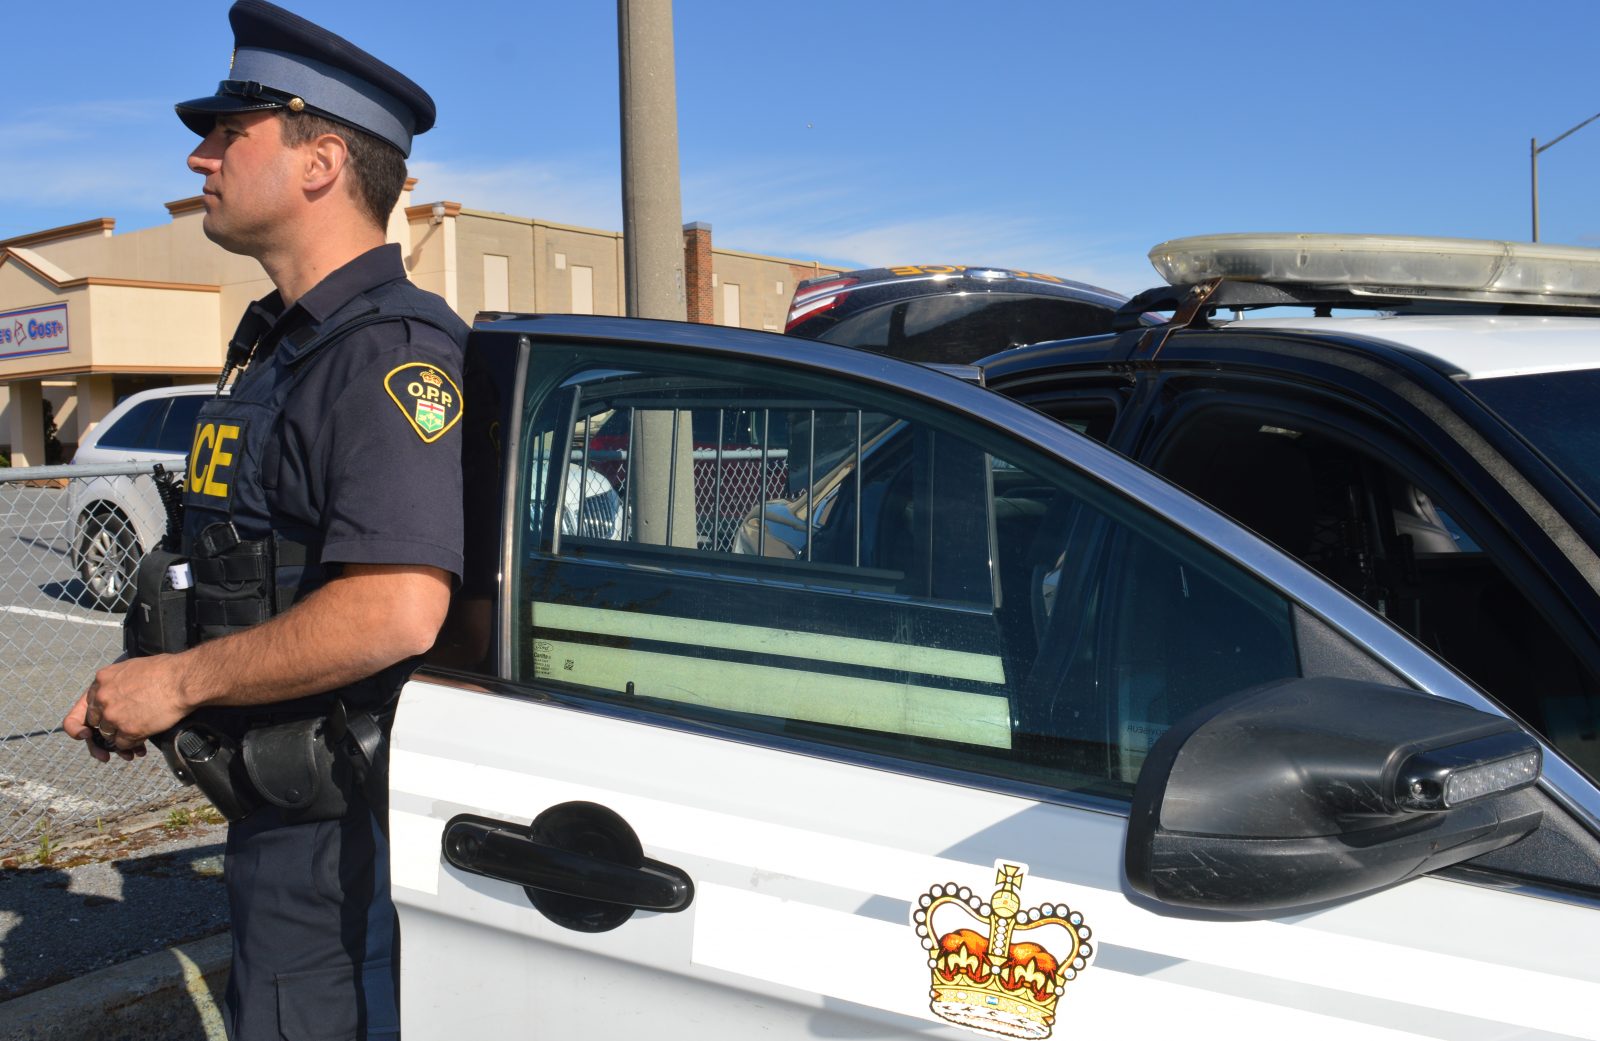 OPP investigates thefts from vehicles, seeks public assistance